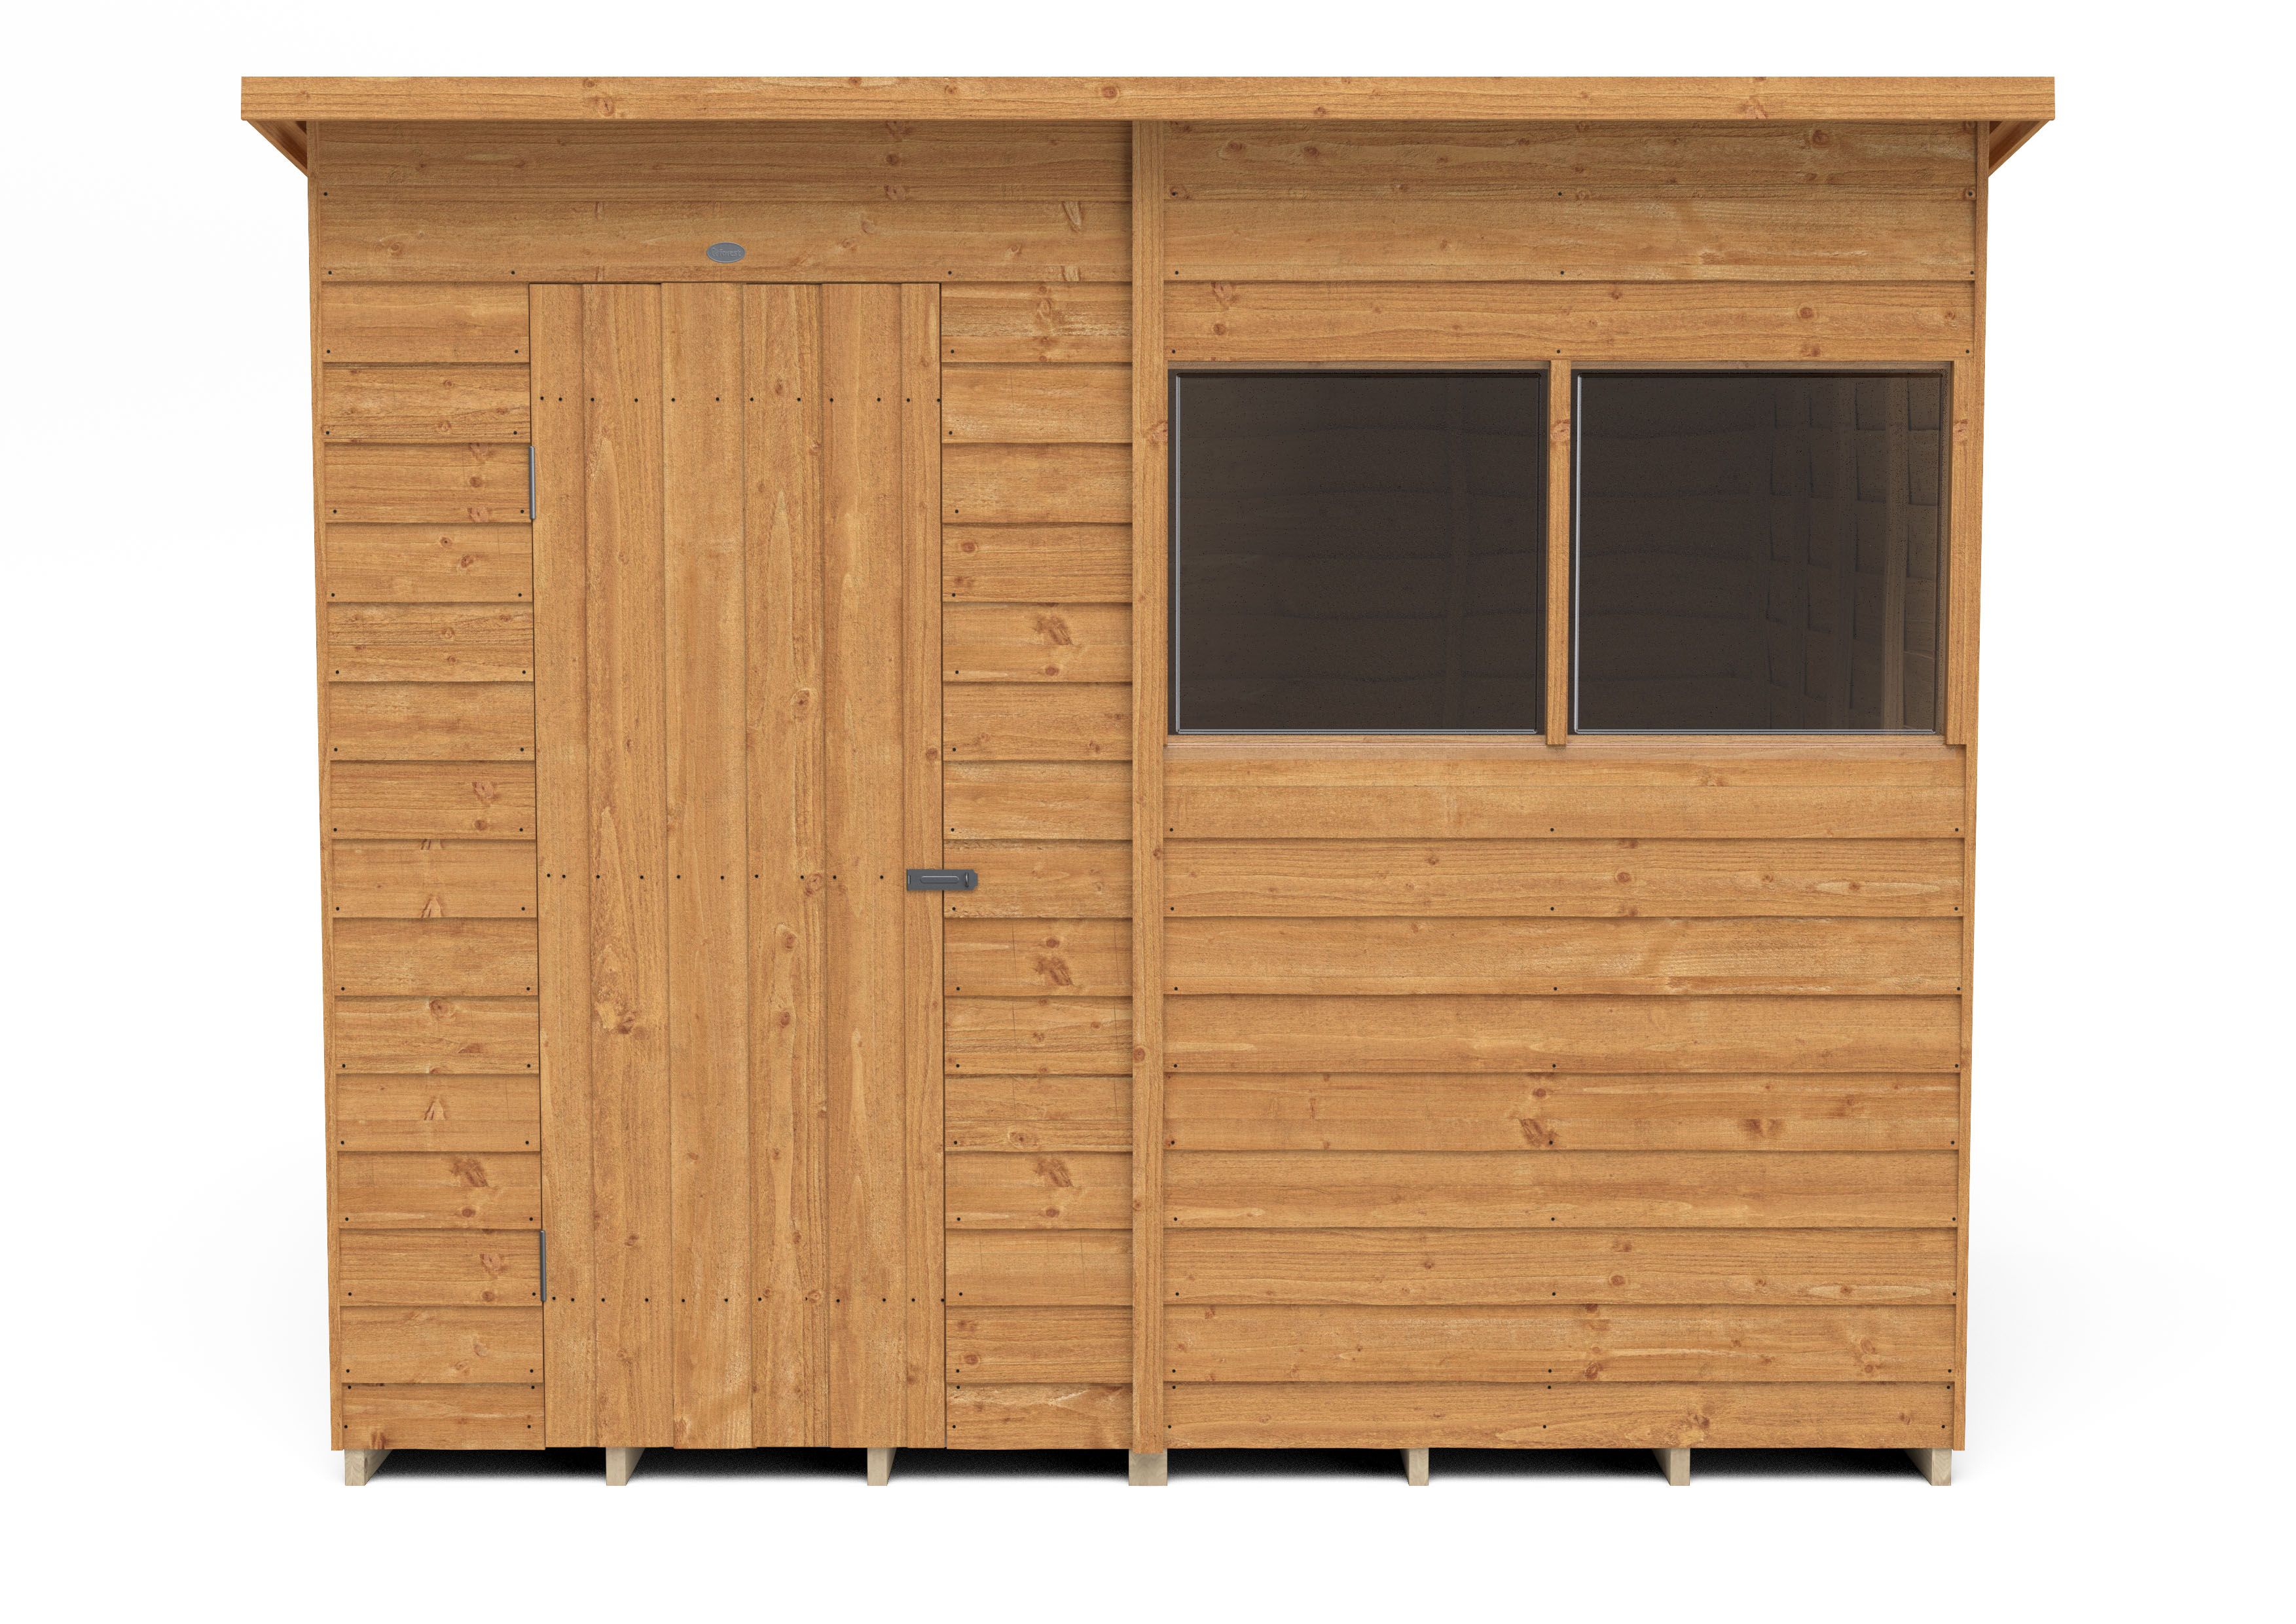 Forest Garden Overlap 8x6 ft Pent Wooden Dip treated Shed with floor & 2 windows - Assembly service included